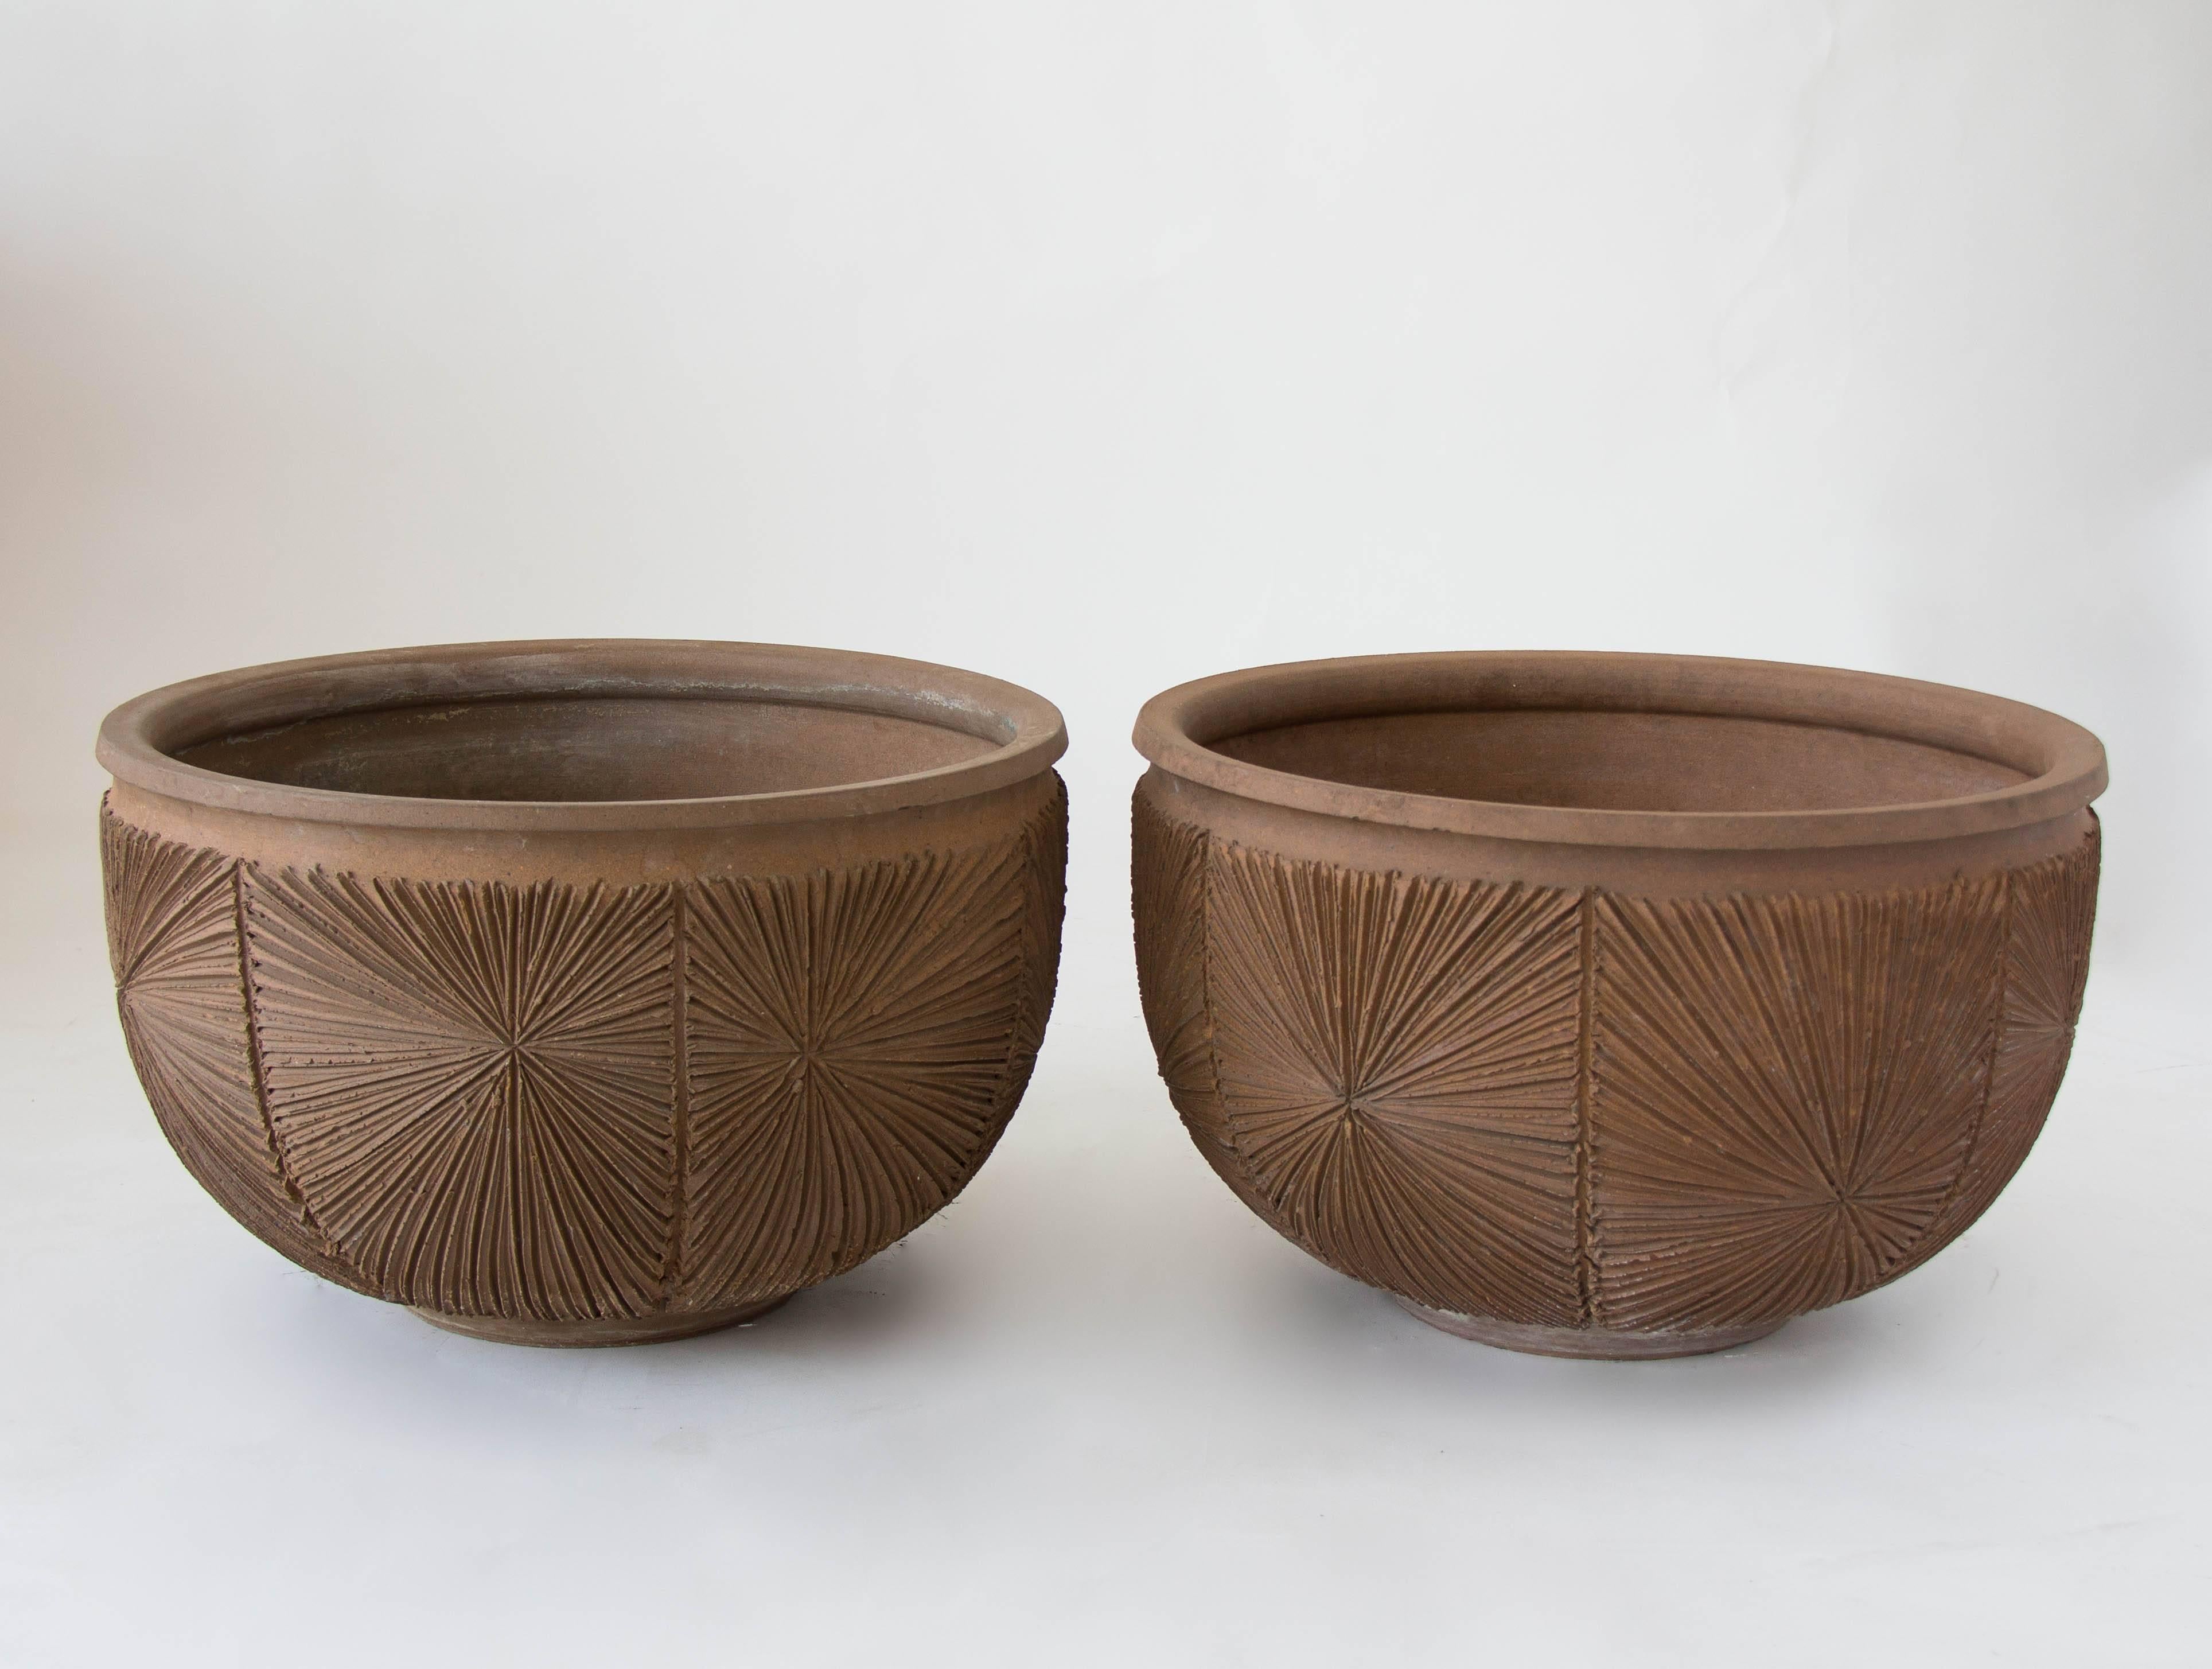 A stoneware bowl planter from Robert Maxwell 1970s collaboration Earthgender. The planter has a rounded lip and an incised all-over sunburst pattern and is unglazed. We have two planters available in this shape and size and the listed price is per